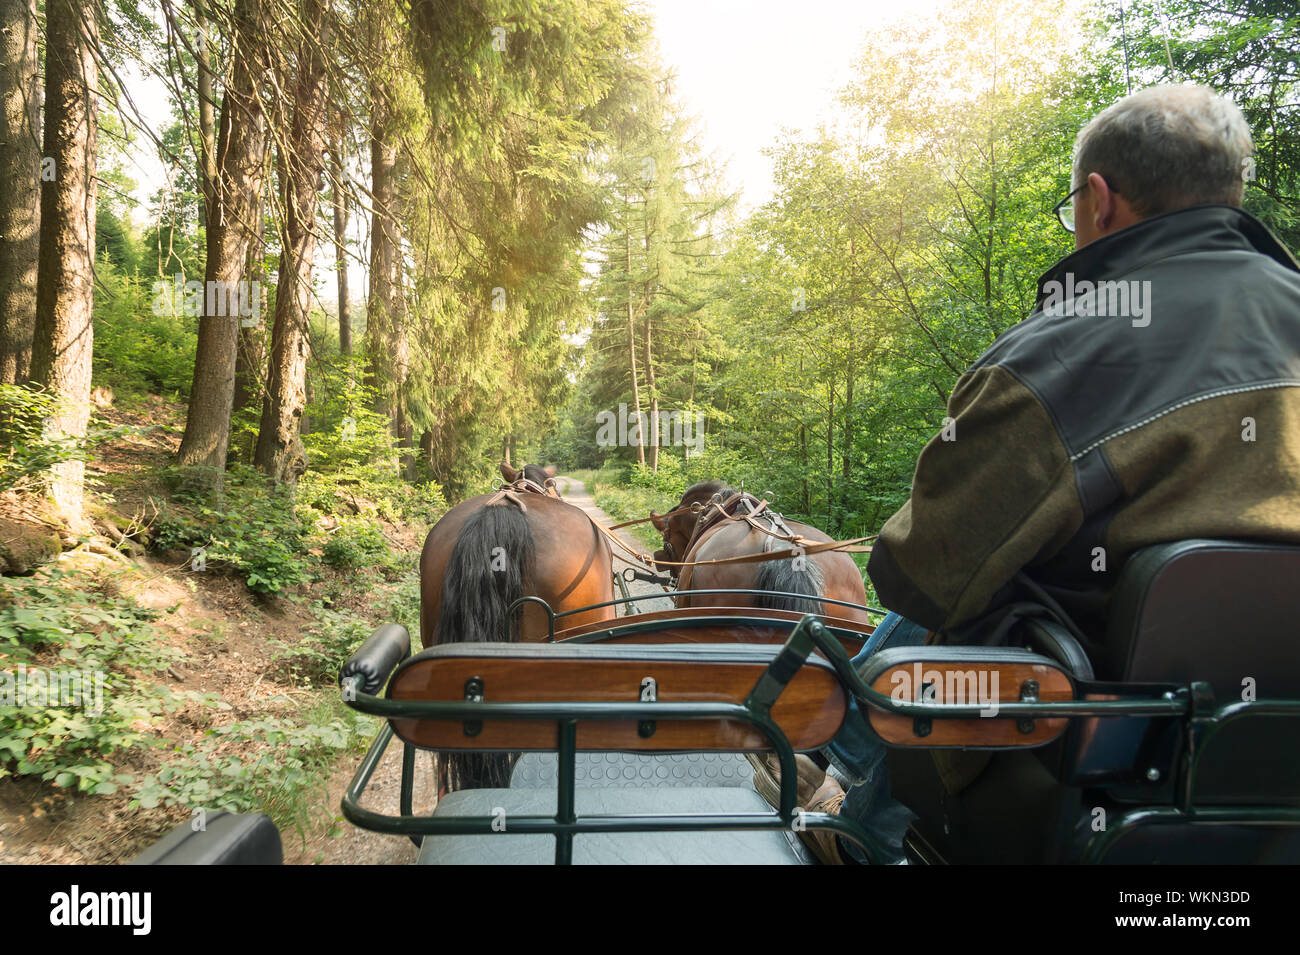 A man drives a carriage with two horses (Saxon Thuringian heavy warm blood). The ride is on a forest path. Sun shines through the treetops. Stock Photo